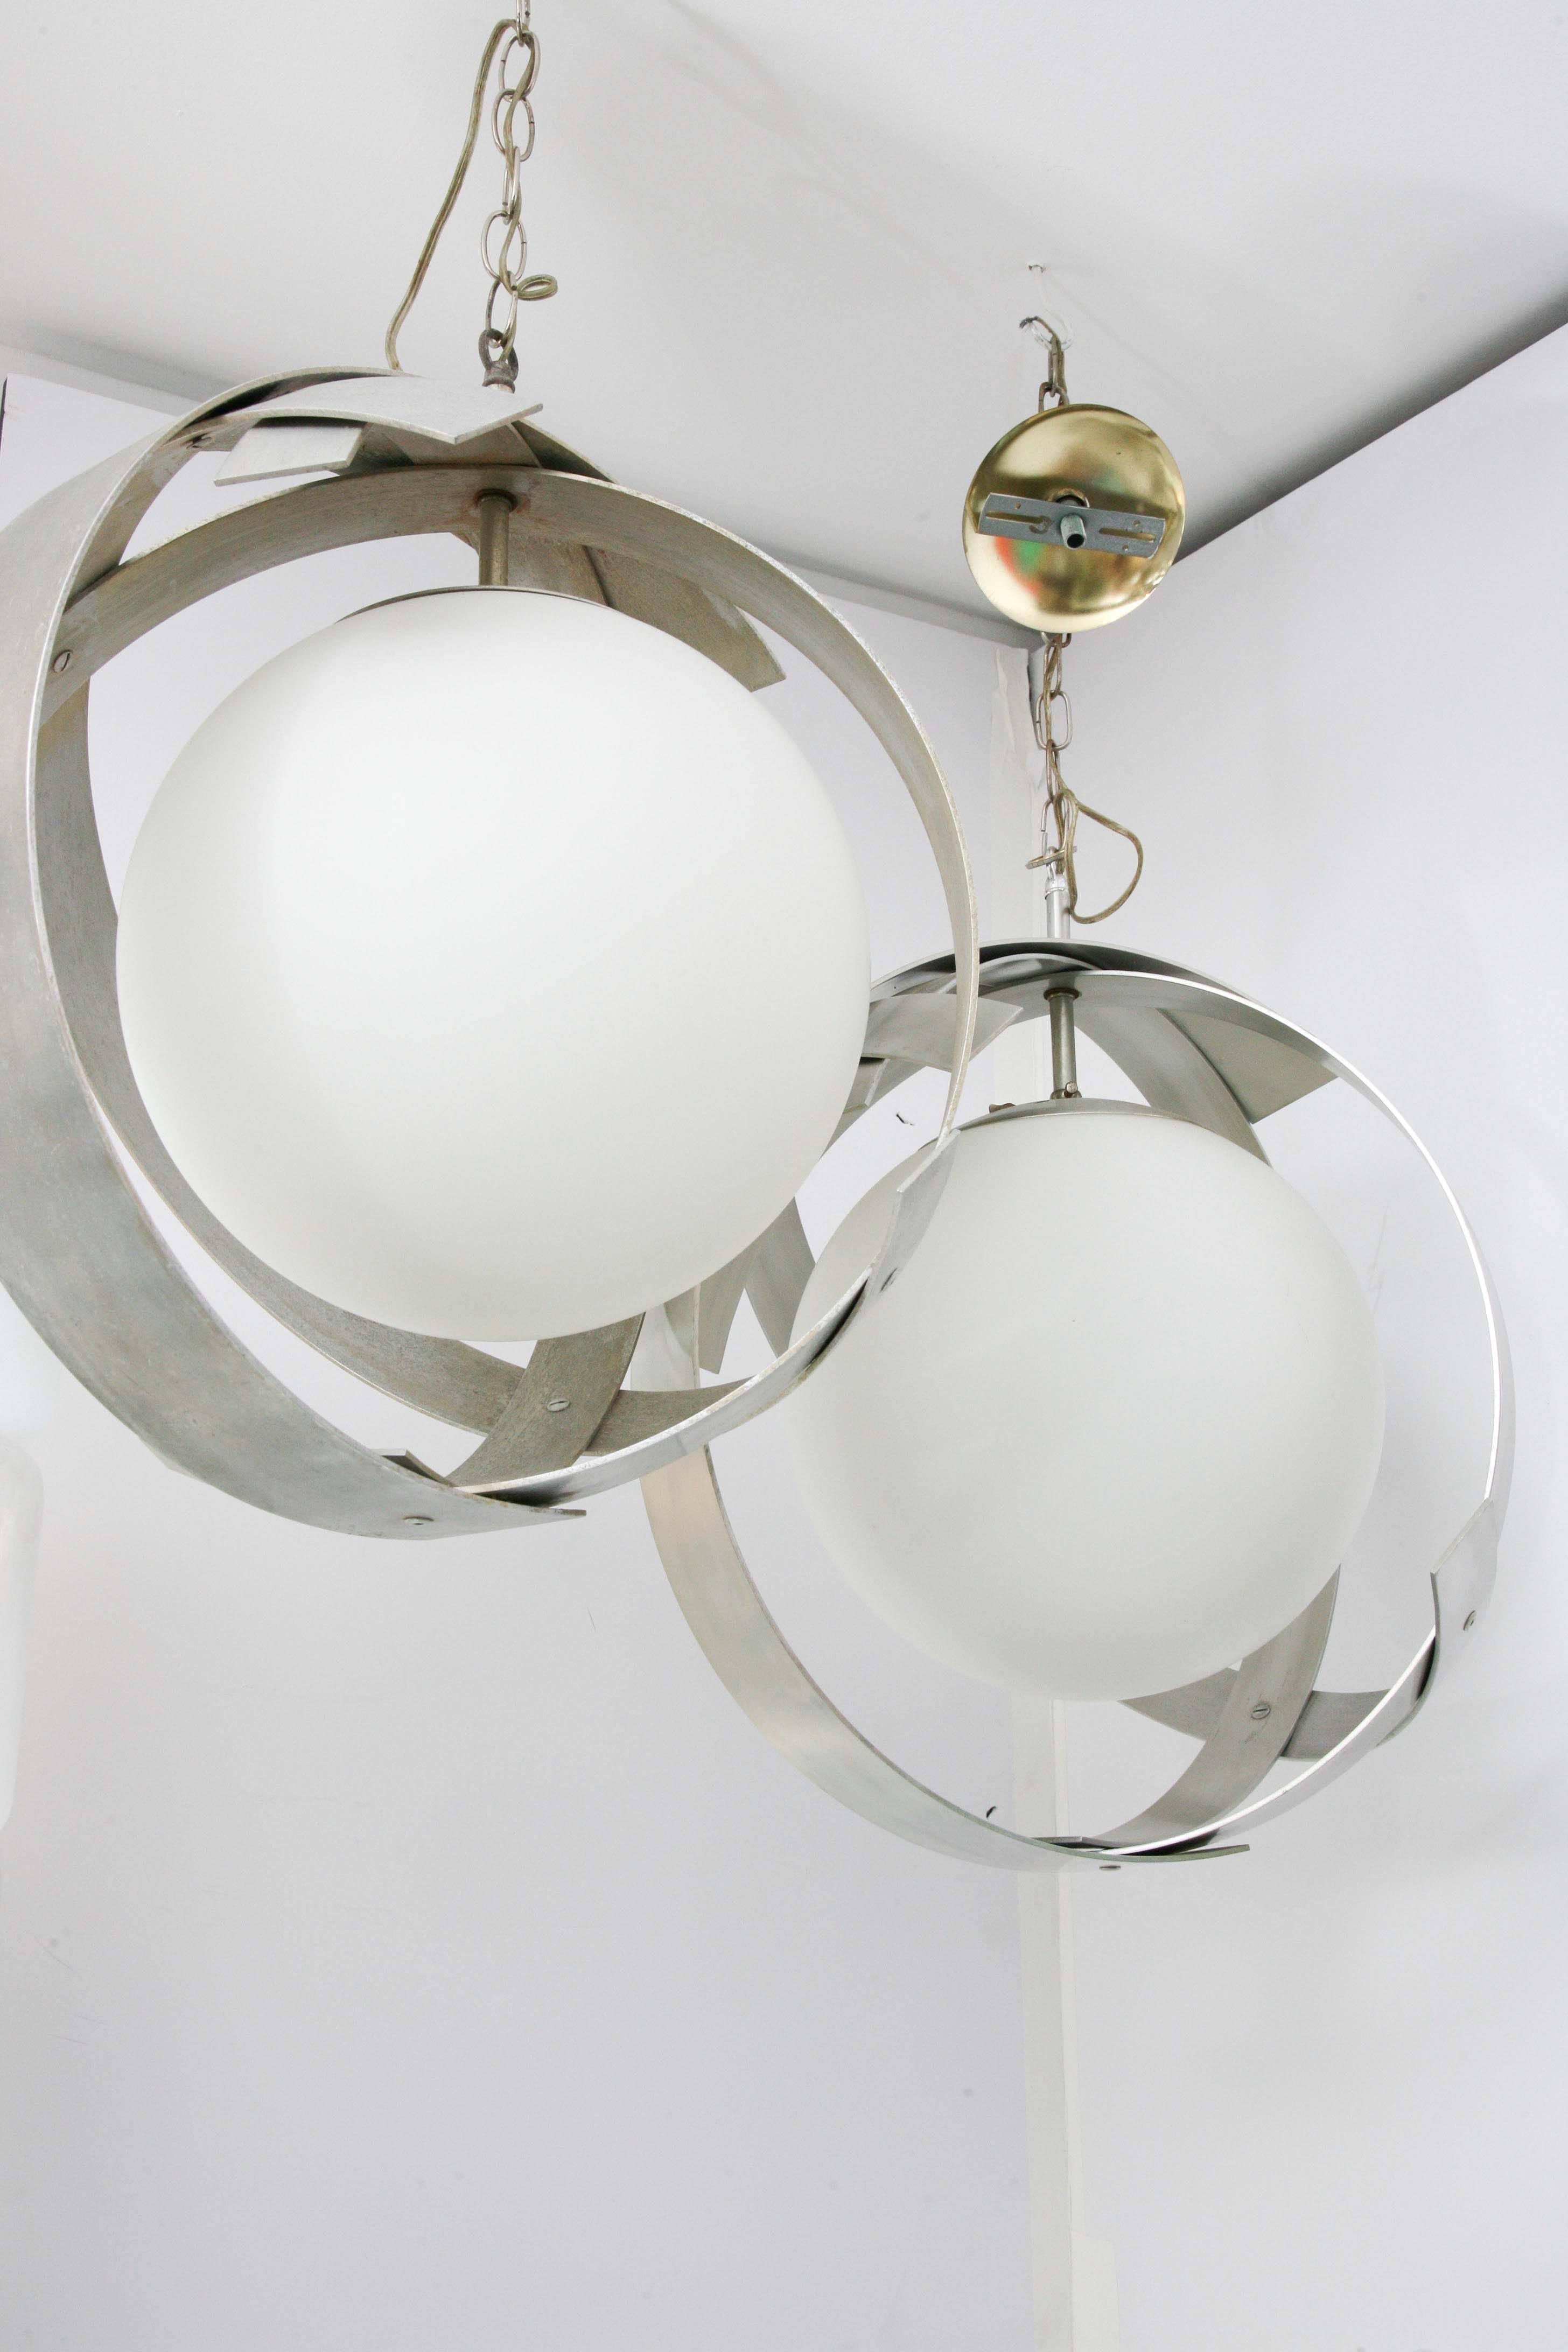 Solid alum. Rings with white satin glass globes. One lamp has Arredoluce label and the other has slightly wider bands. Both pendants hang from chrome chains and electrical is original and in working order. Priced individually. There is enough chord